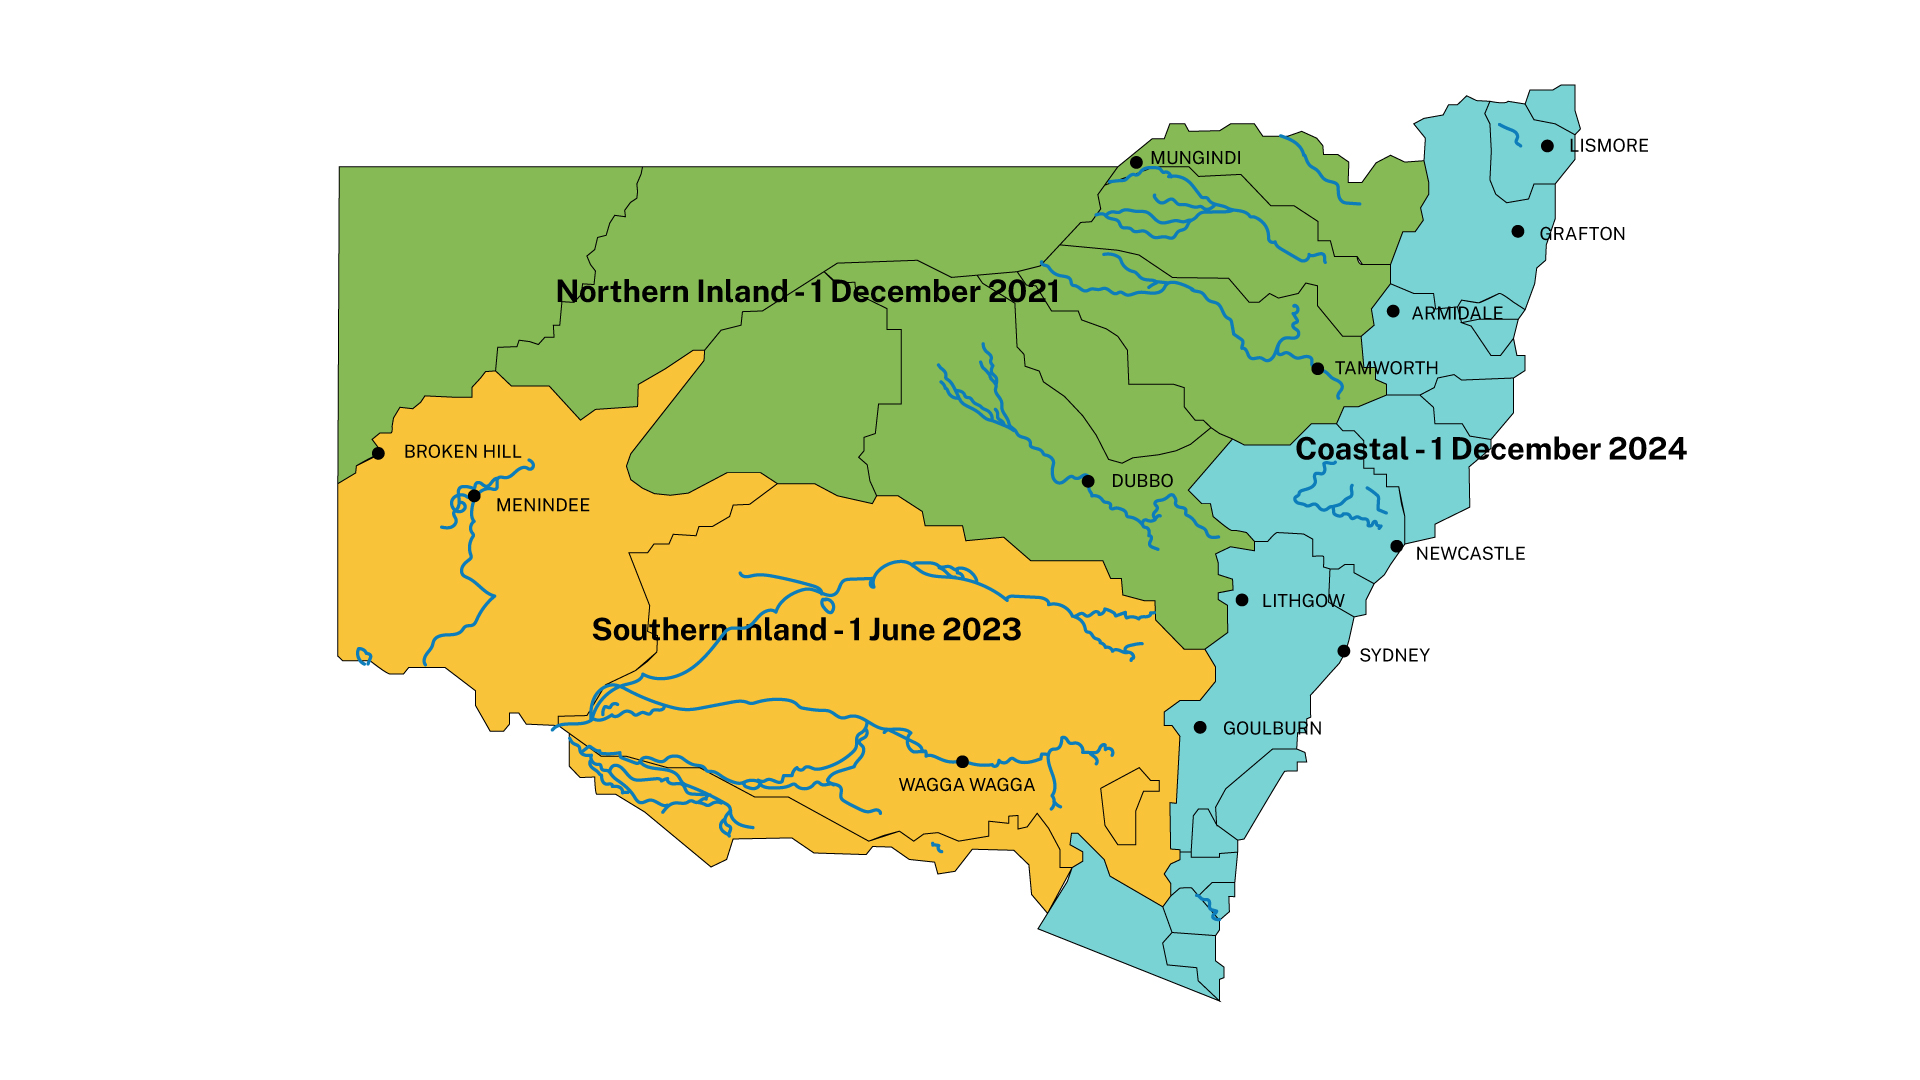 Map of NSW showing the metering deadlines for the three different regions